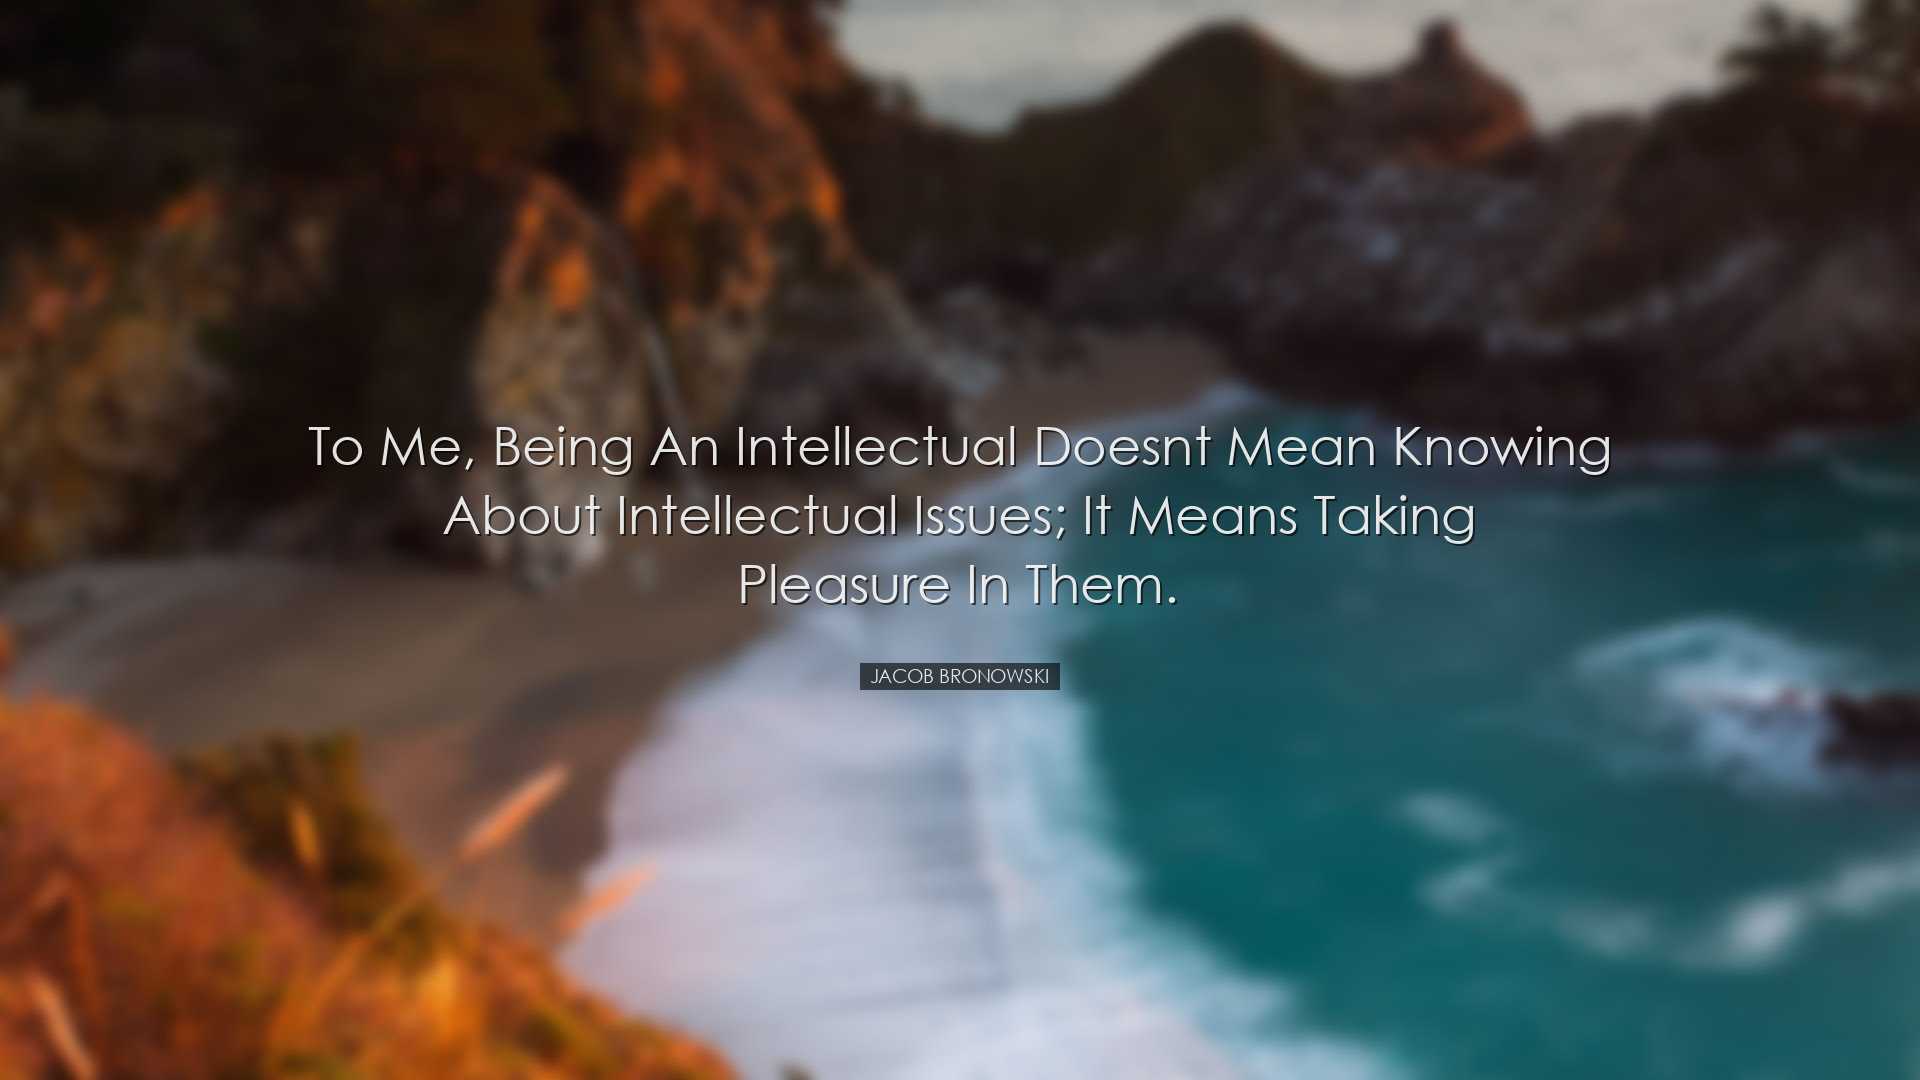 To me, being an intellectual doesnt mean knowing about intellectua